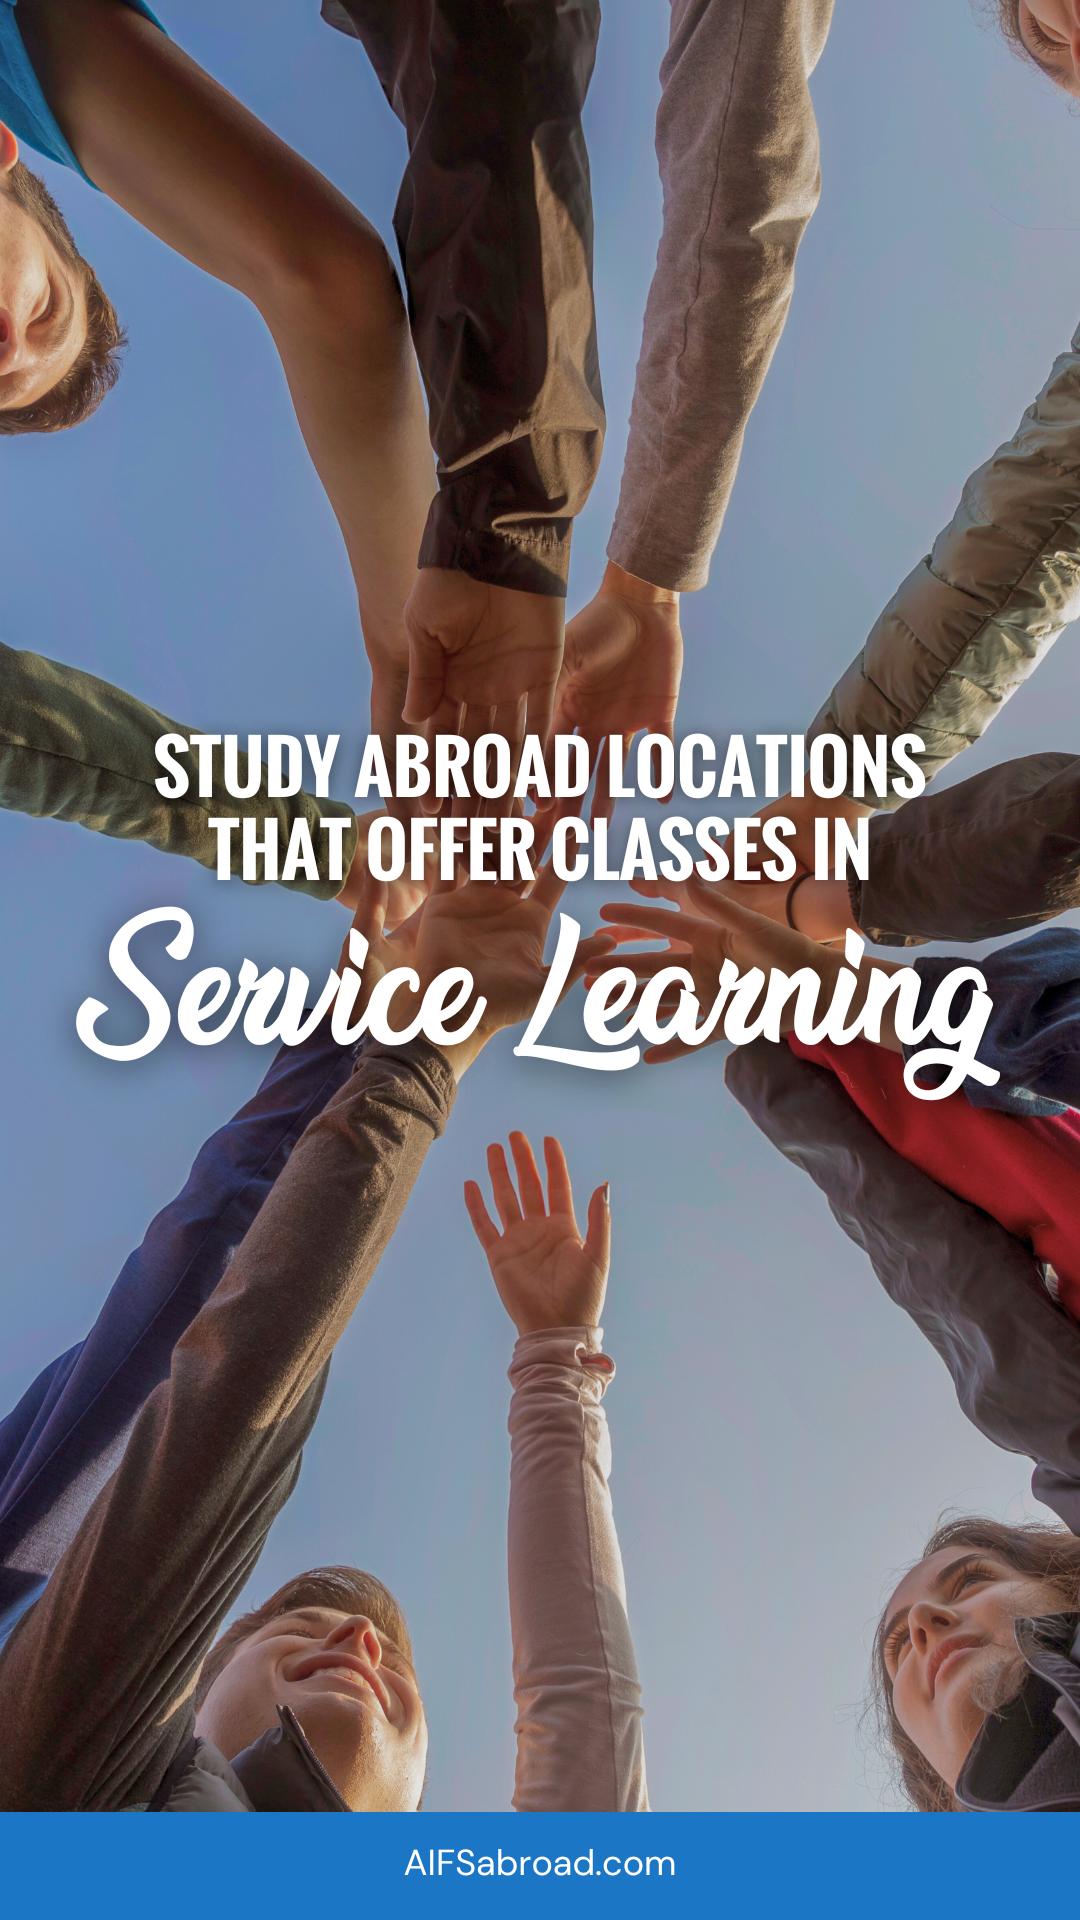 hands in huddle with text overlay "Study Abroad Program Locations that Offer Service Learning & Community Service Classes" pin image